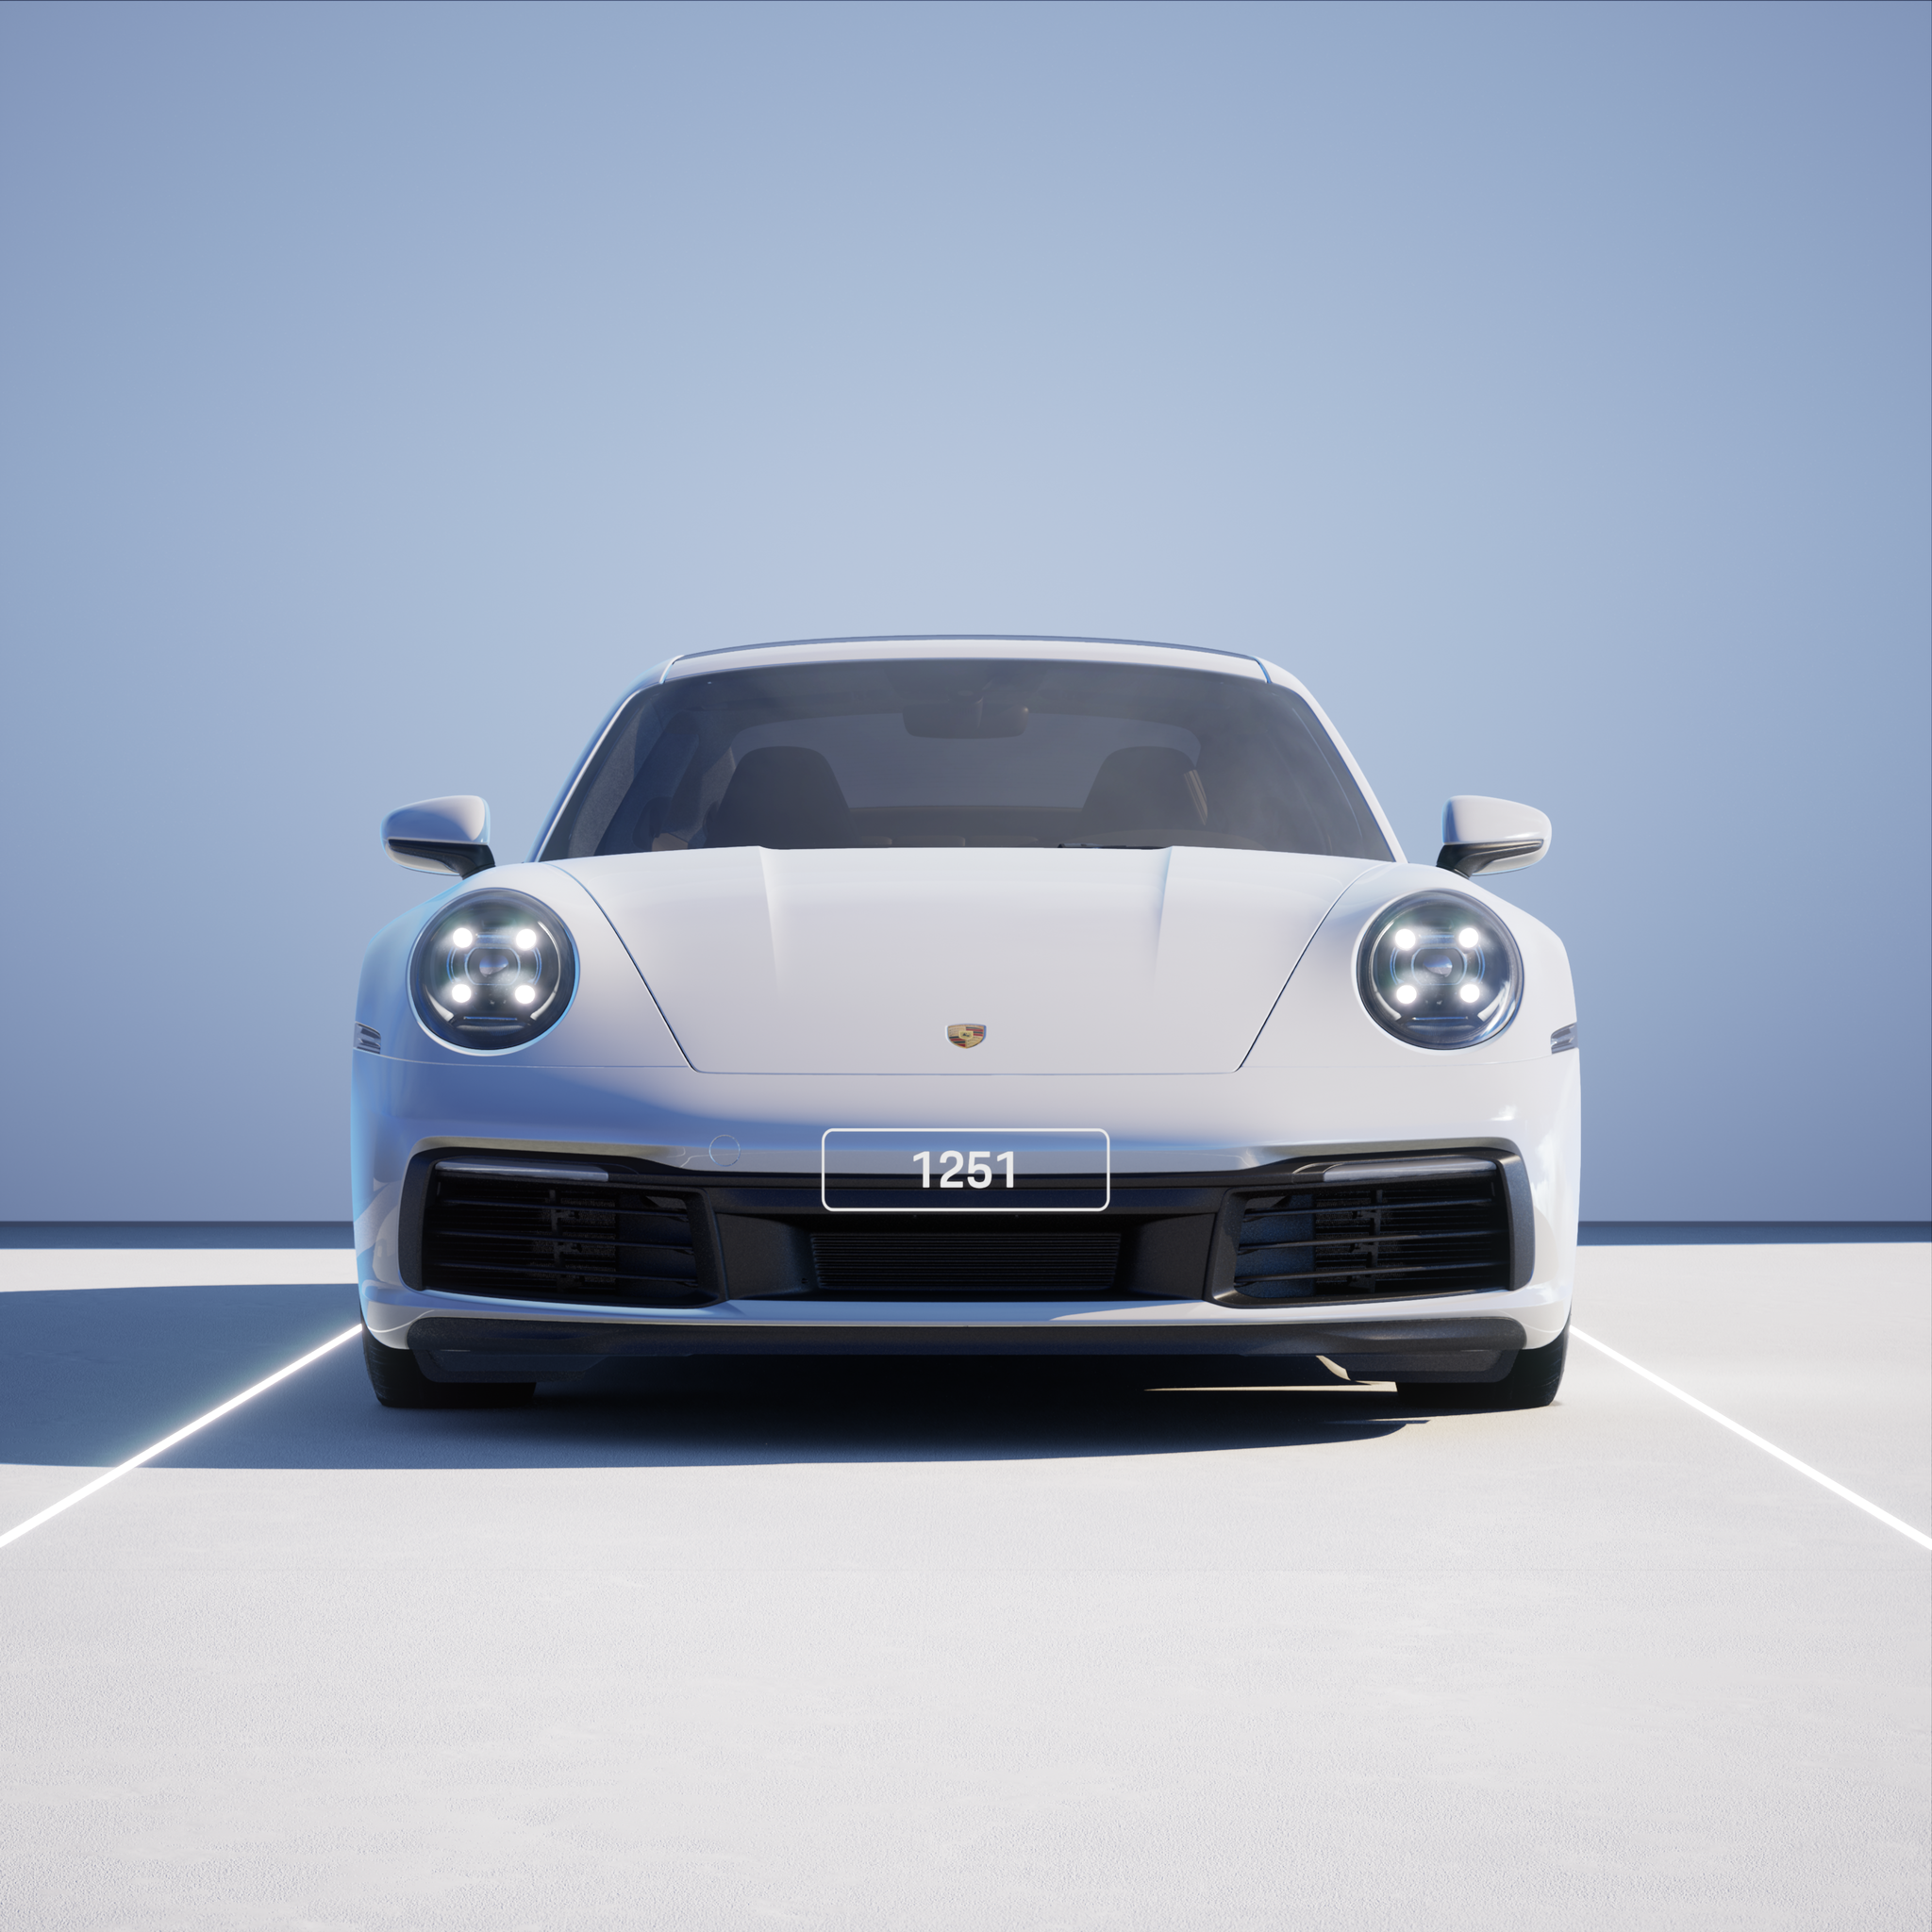 The PORSCHΞ 911 1251 image in phase